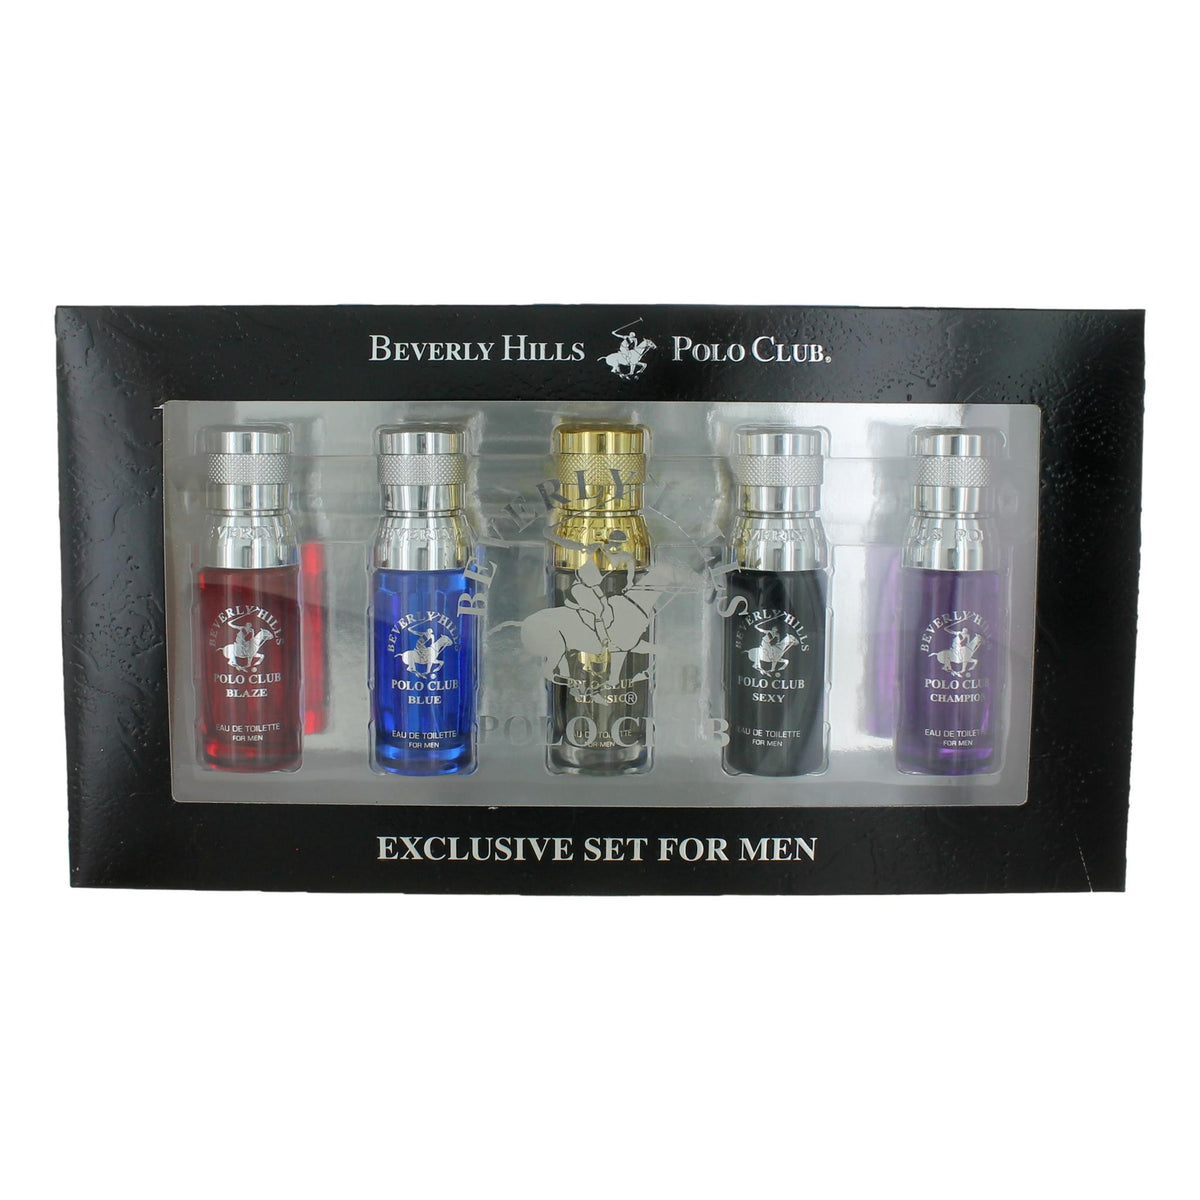 BHPC Exclusive Set by Beverly Hills Polo Club, 5 Piece Variety set for Men